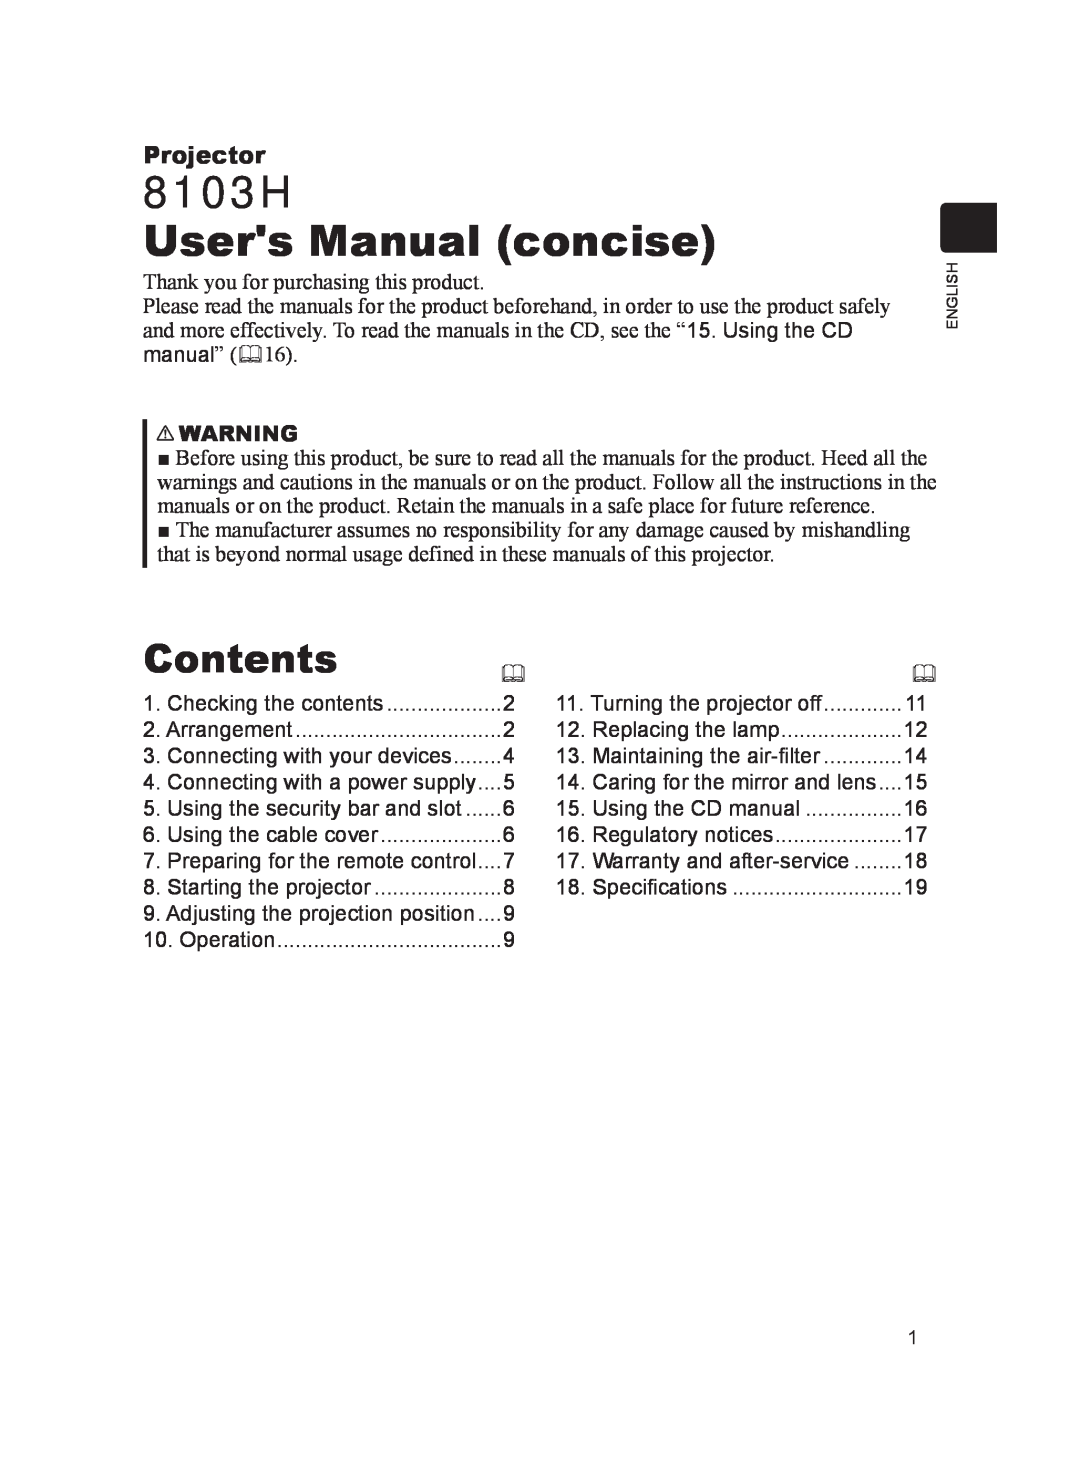 Dukane user manual Contents, 8103H Users Manual concise, Projector 